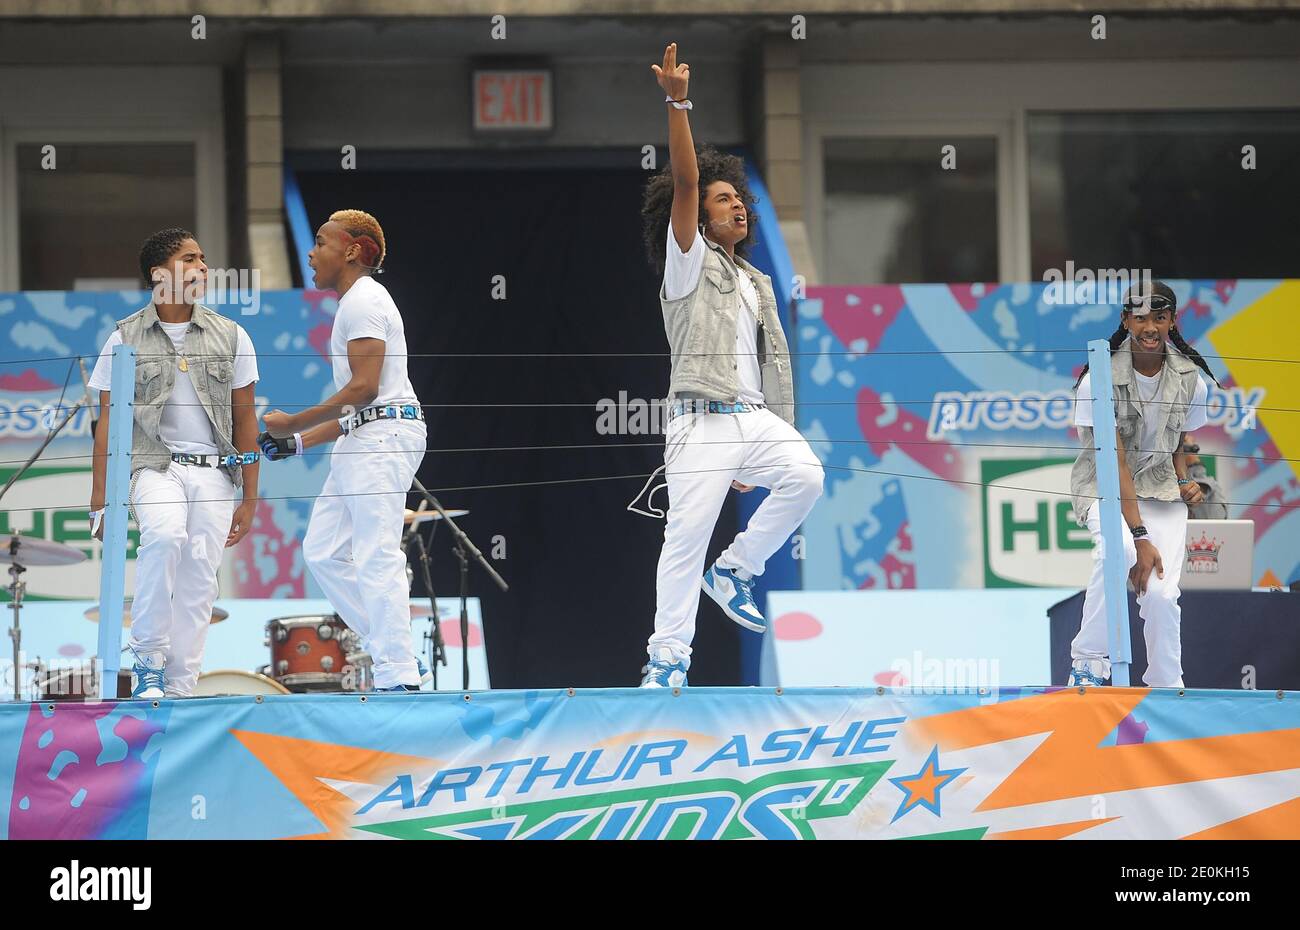 Mindless Behavior attends the Arthur Ashe Kids Day at USTA Billie Jean King National Tennis Center on August 25, 2012 in New York City, NYC, USA. Photo by Brad Barket/ABACAPRESS.COM Stock Photo